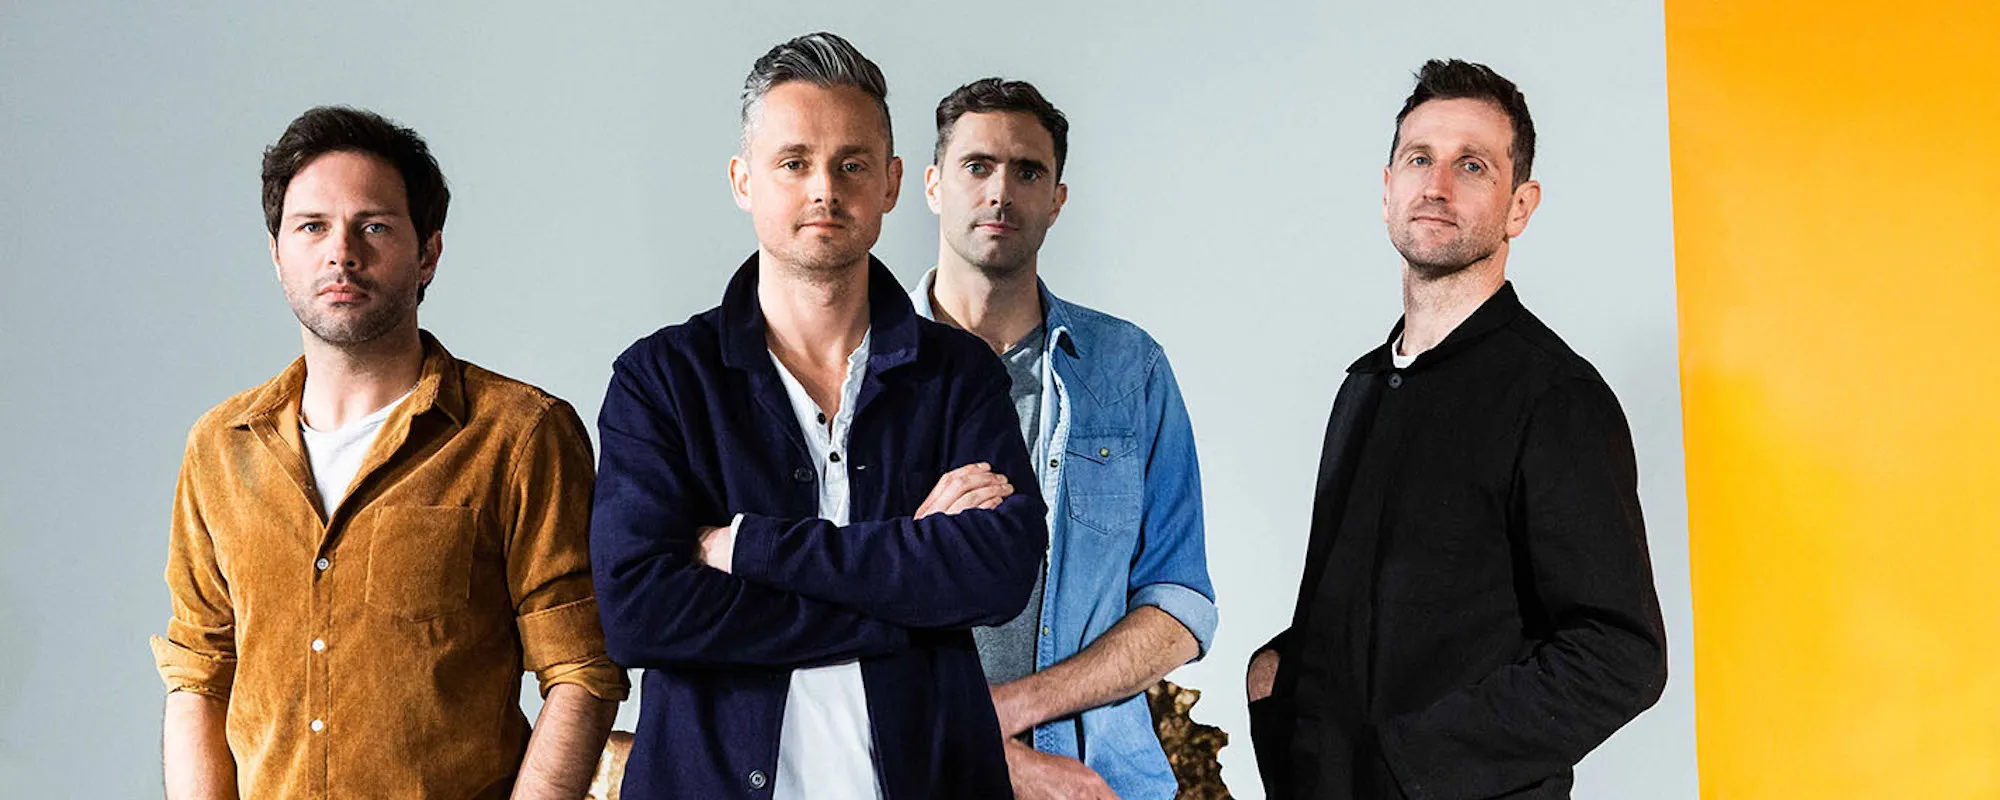 Keane’s New Single “Love Actually” Was Written for the Classic Rom-Com’s Soundtrack, But Didn’t Make the Cut